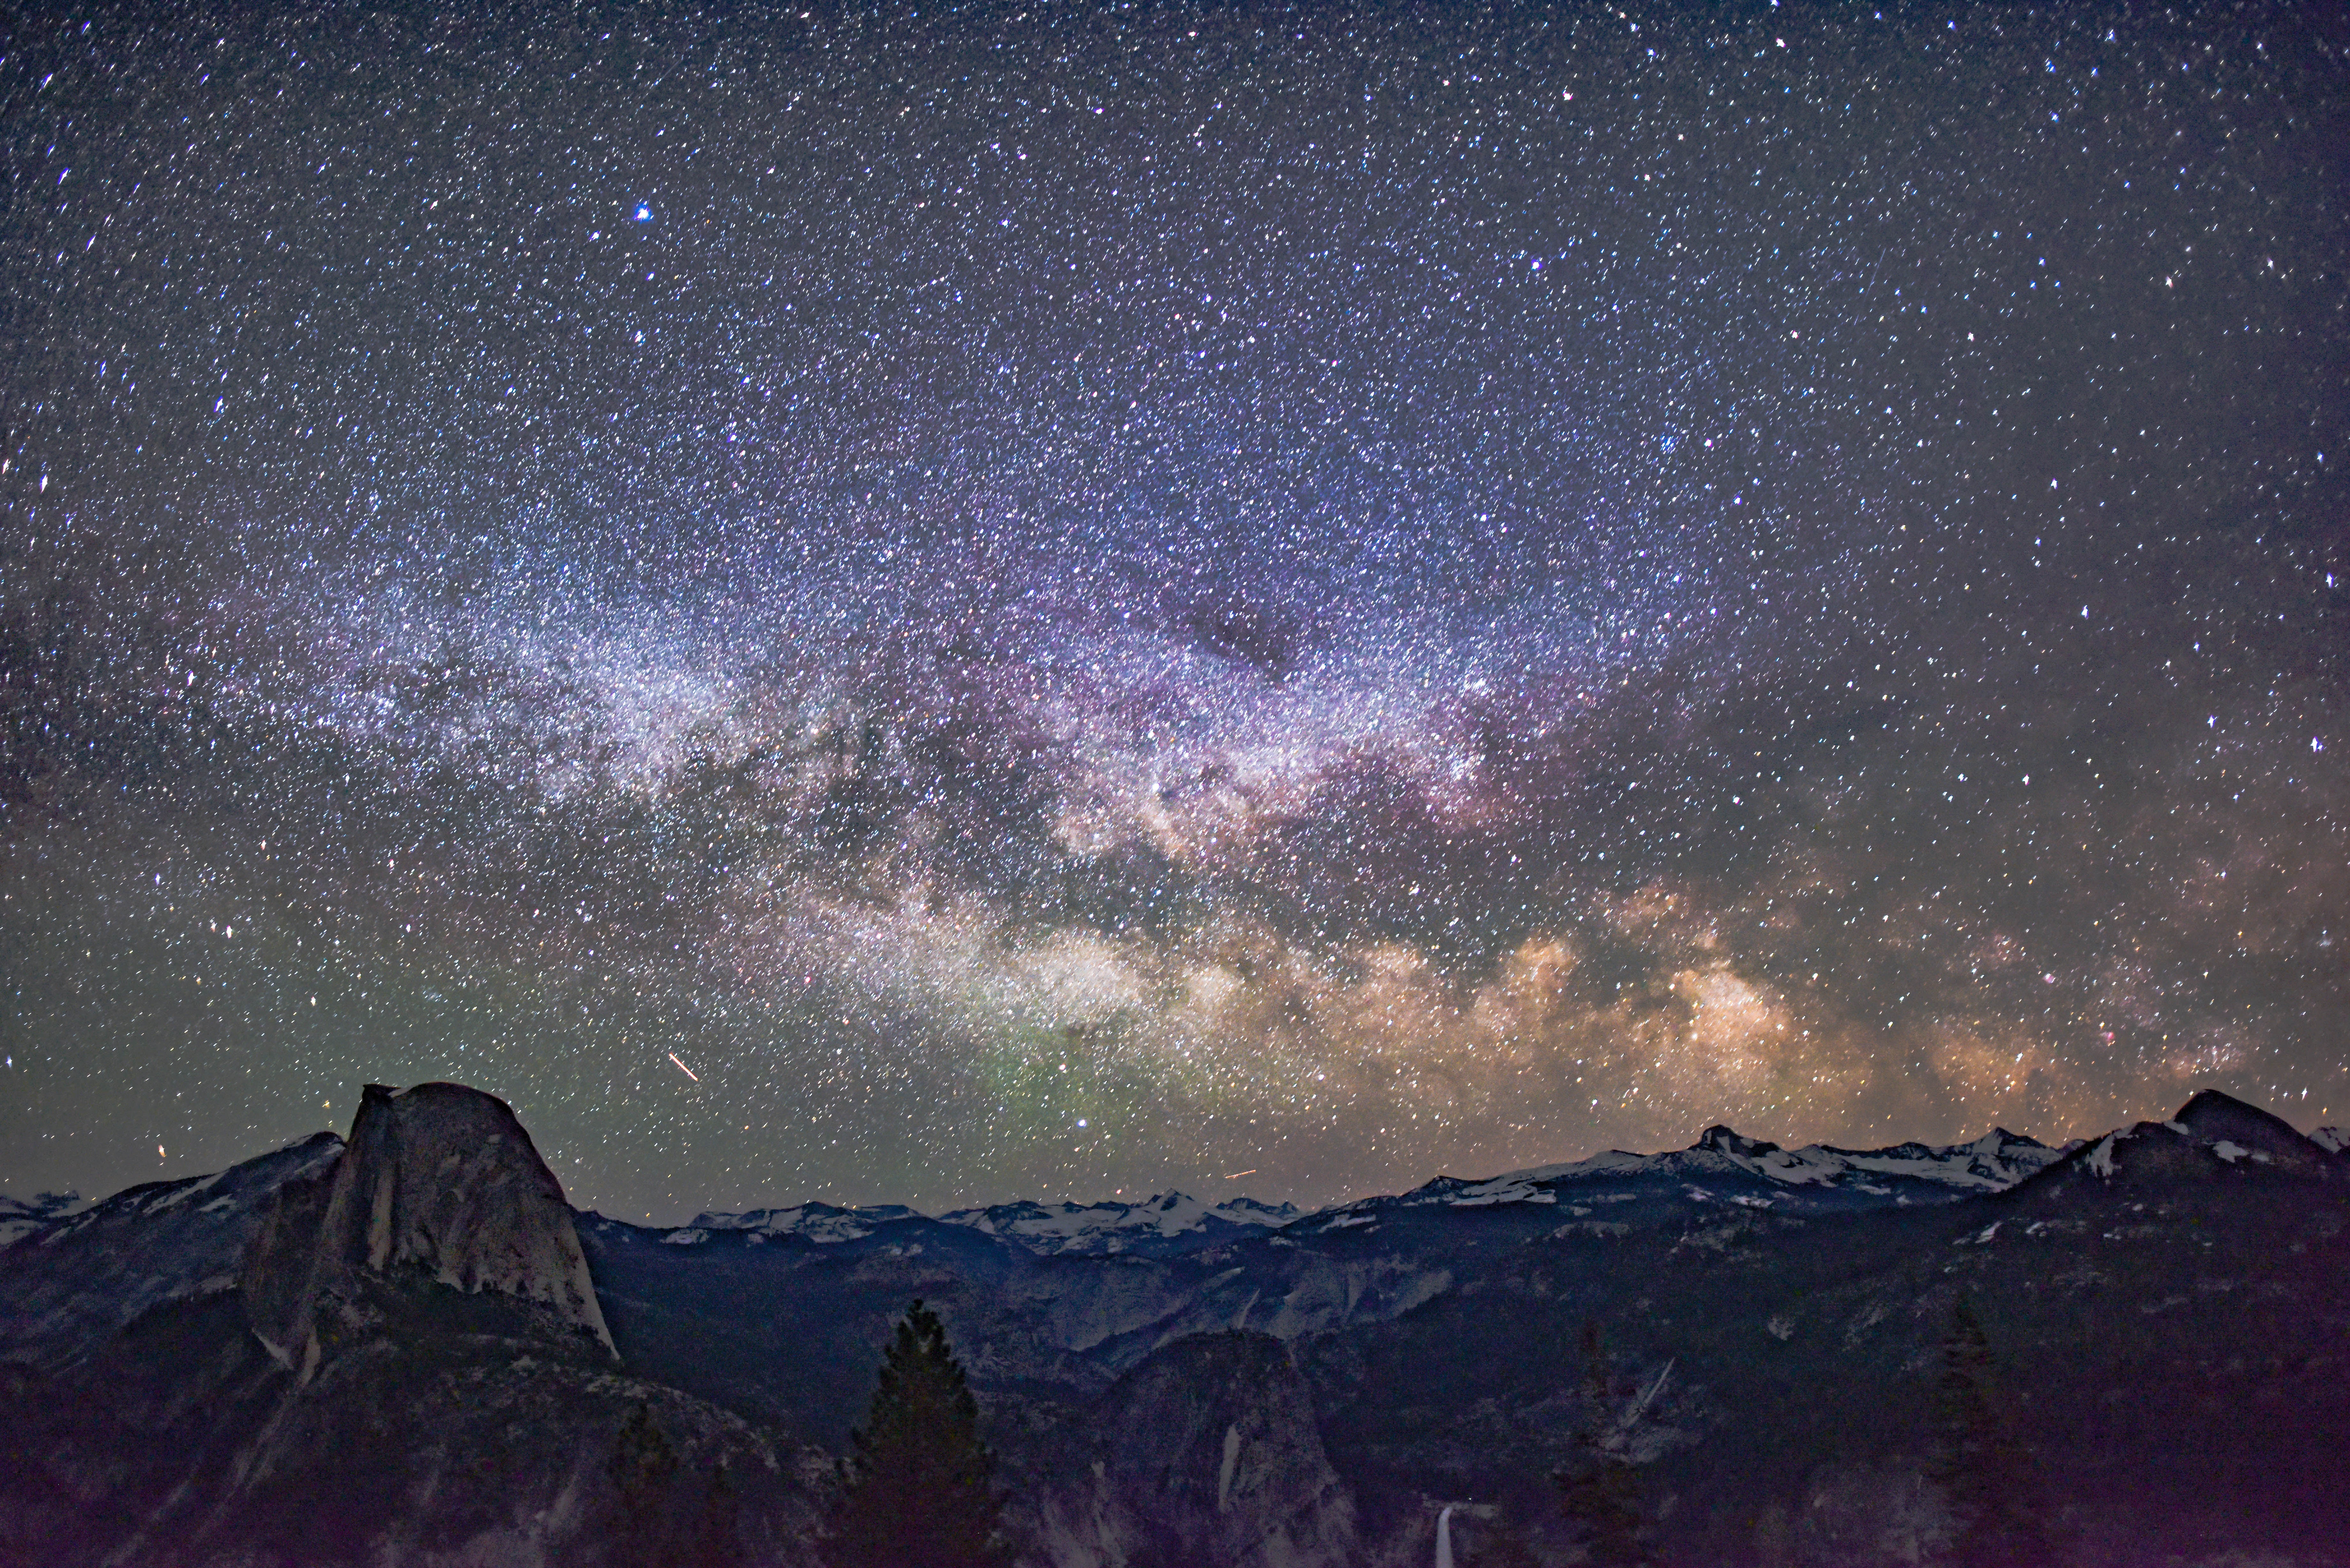 Phone wallpaper: Universe, Mountains, Starry Sky, Galaxy free download #100...